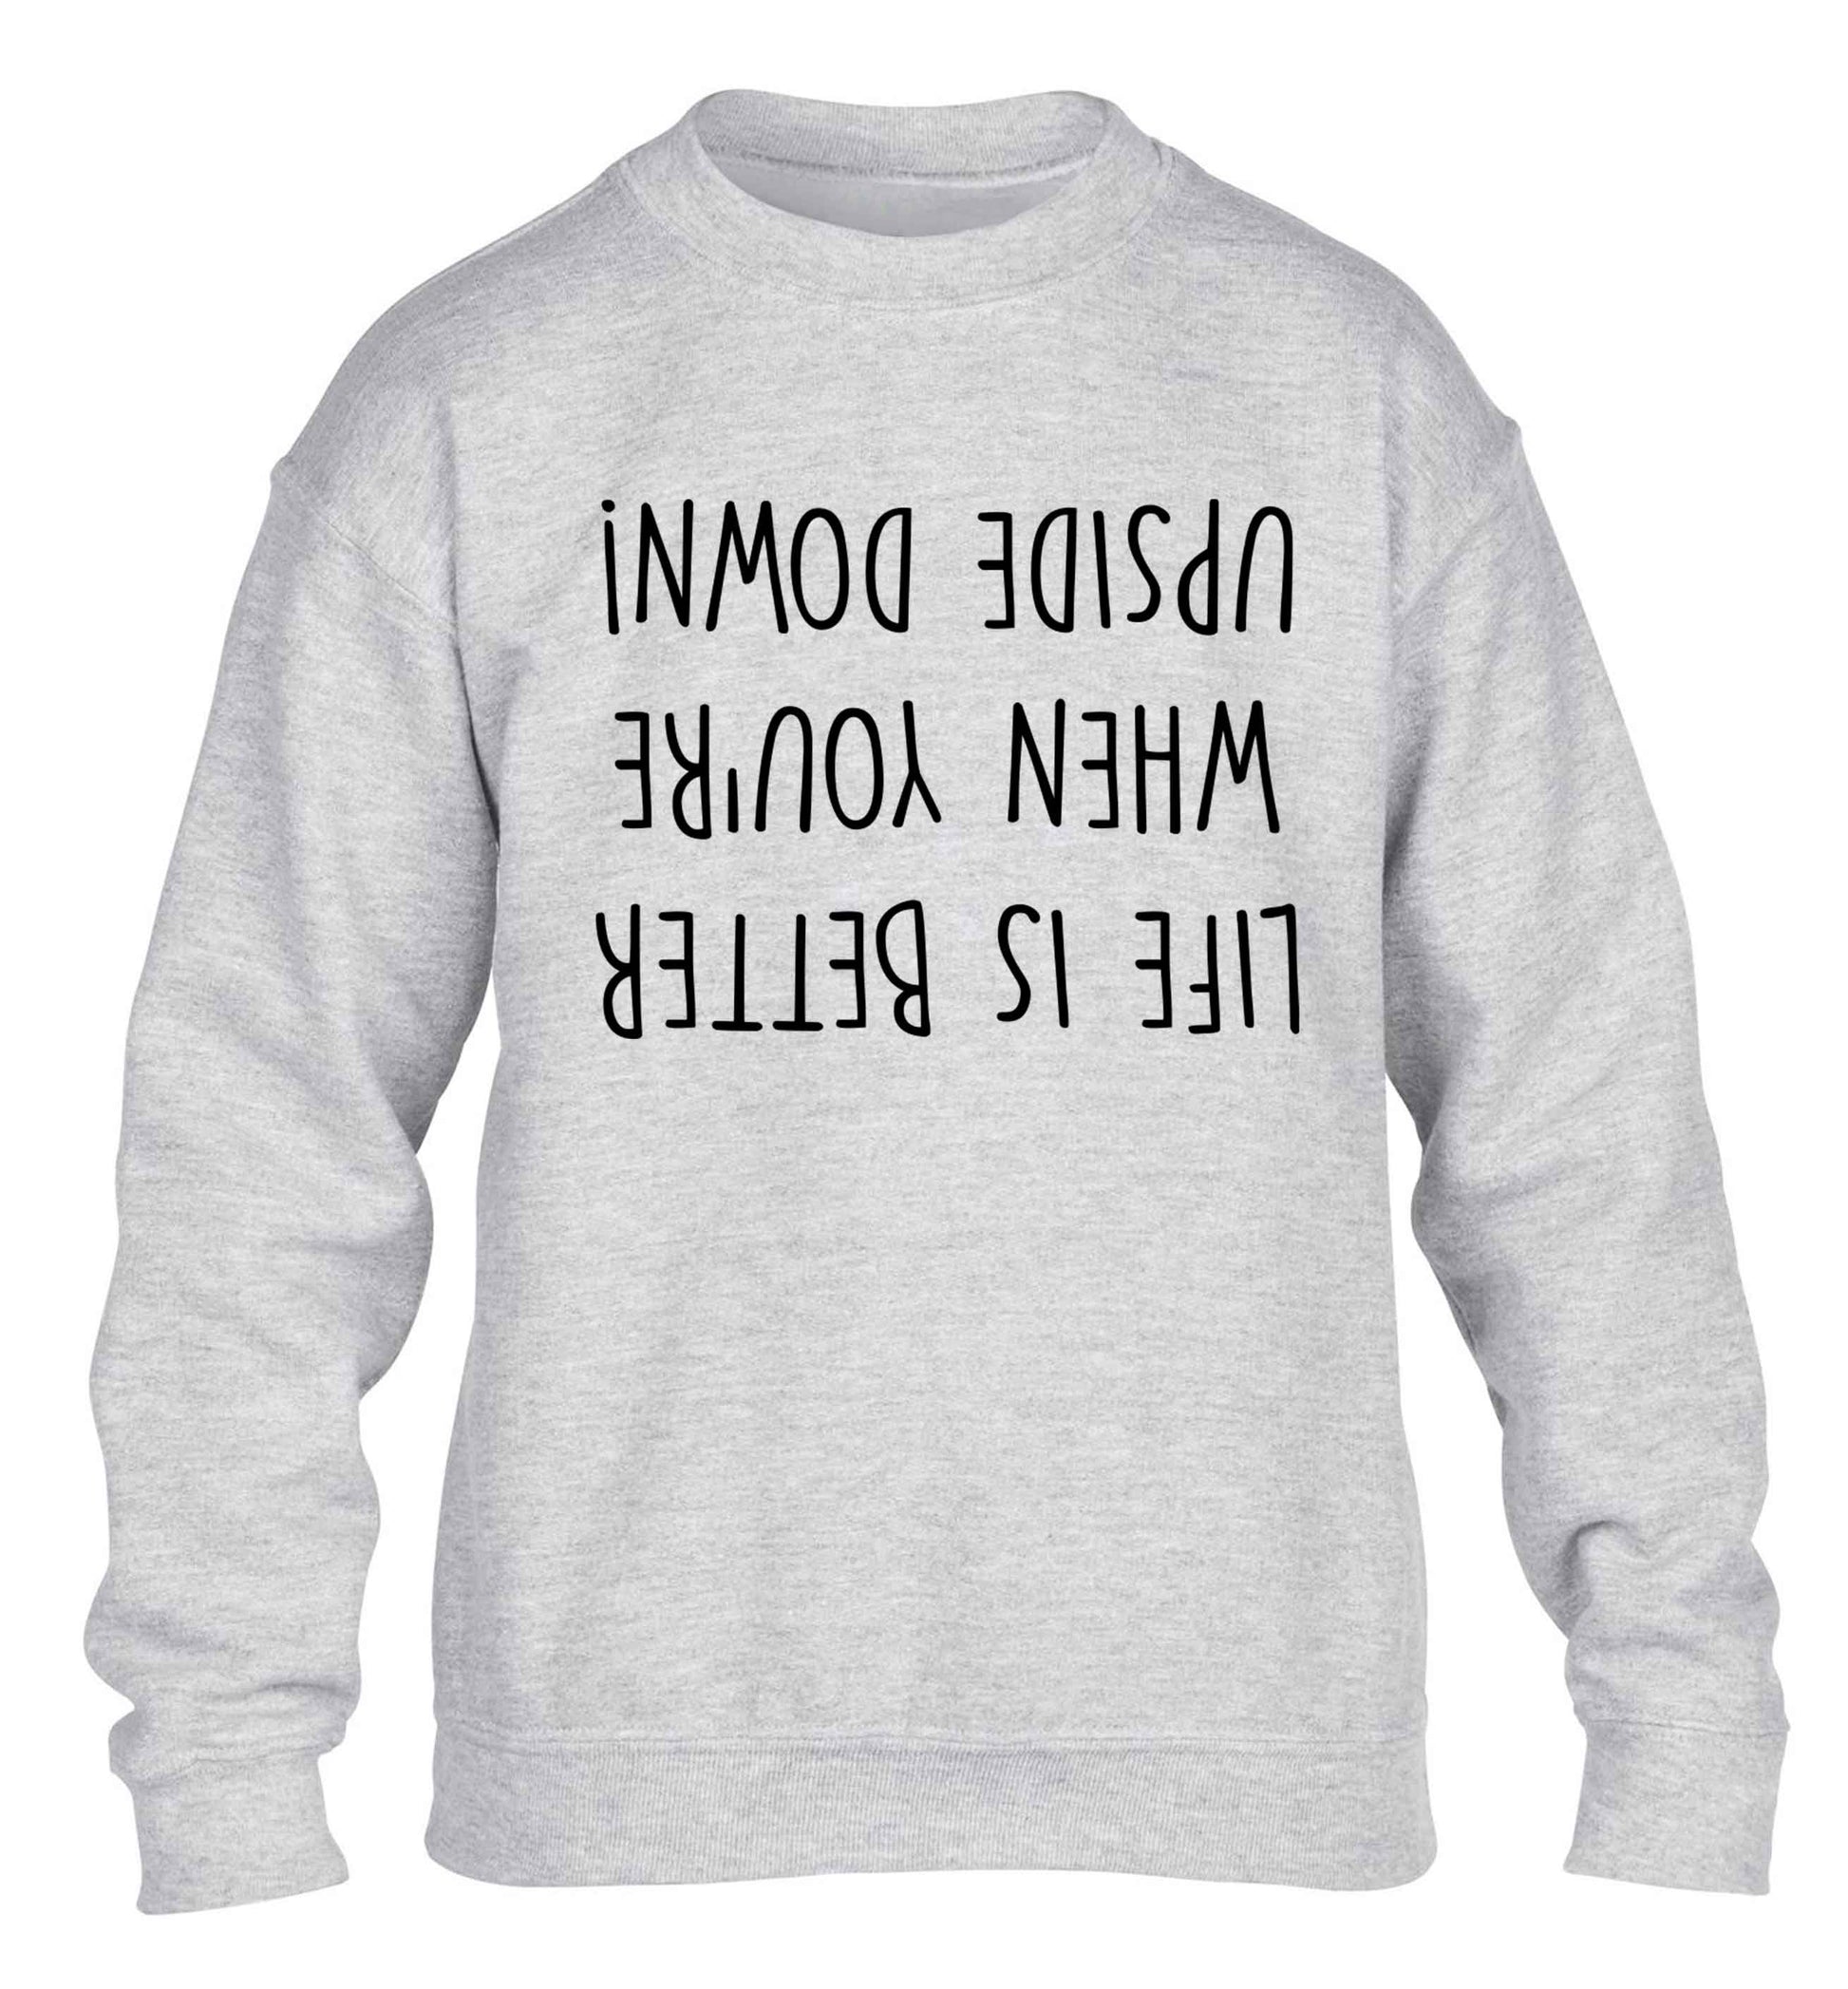 Life is better upside down children's grey sweater 12-13 Years